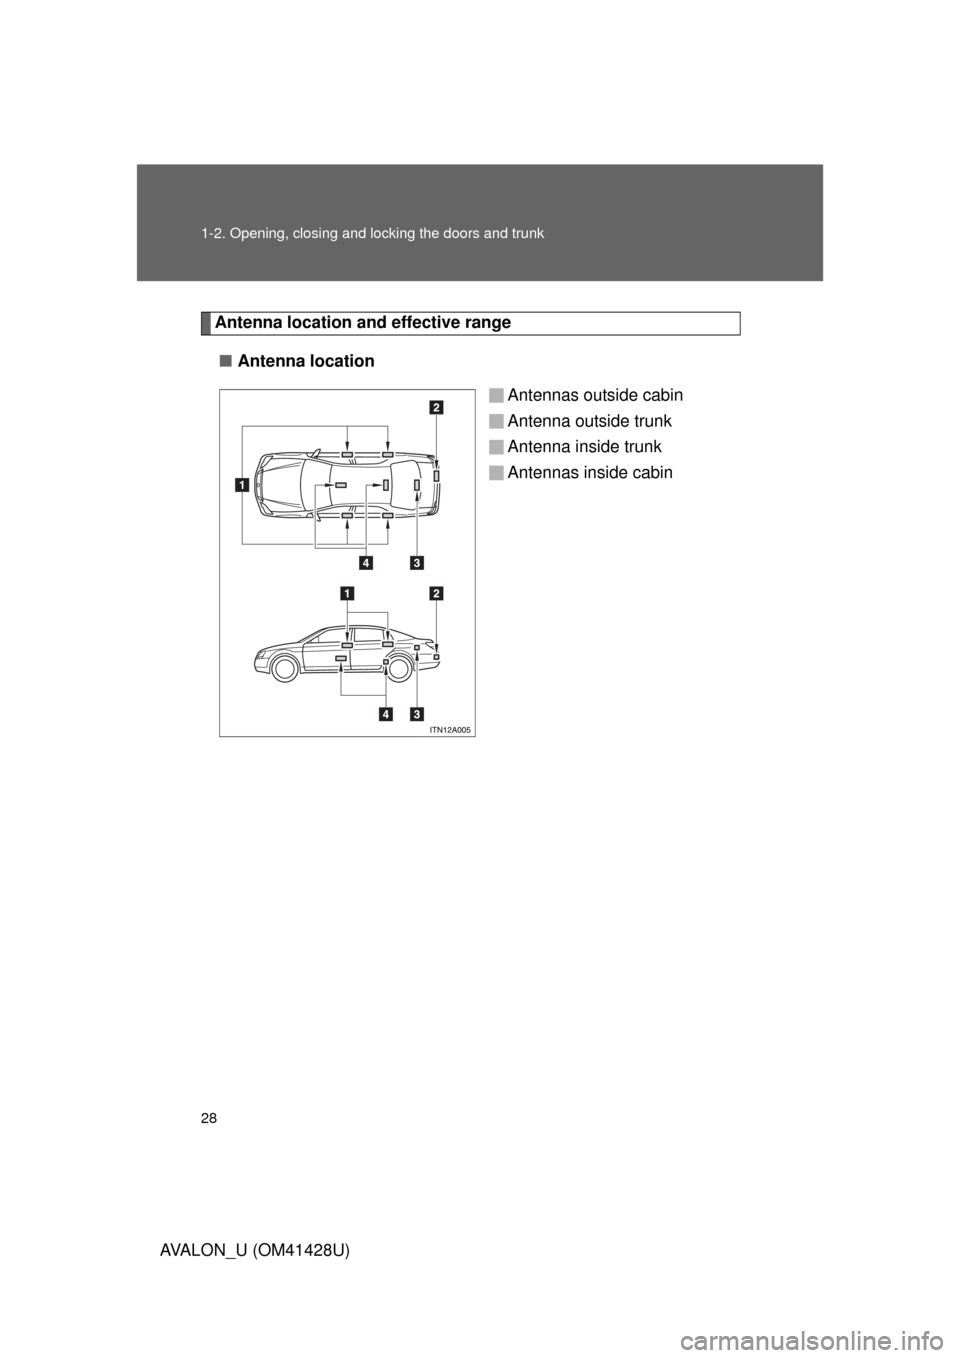 TOYOTA AVALON 2011 XX30 / 3.G Owners Manual 28 1-2. Opening, closing and locking the doors and trunk
AVALON_U (OM41428U)
Antenna location and effective range
■Antenna location
Antennas outside cabin
Antenna outside trunk
Antenna inside trunk
